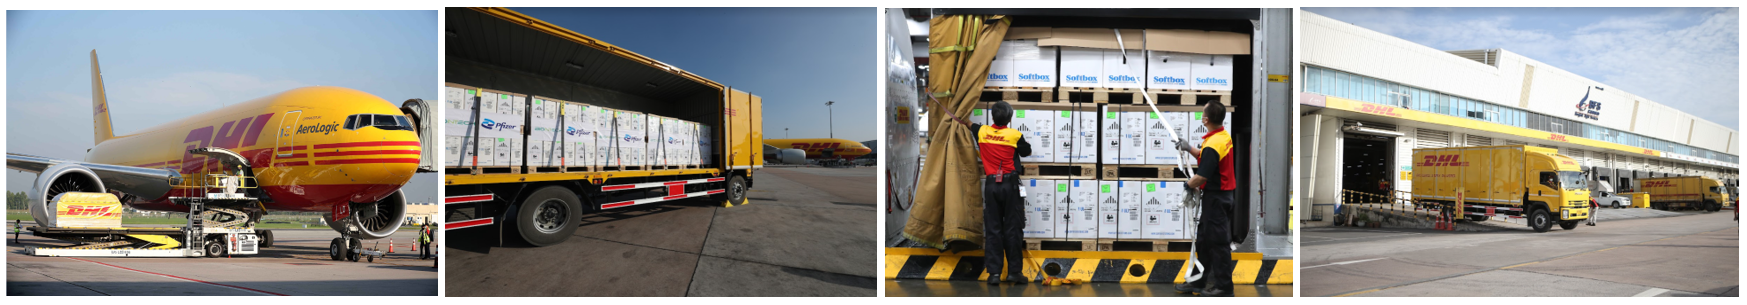 DHL Express_covid-19 vaccine distribution